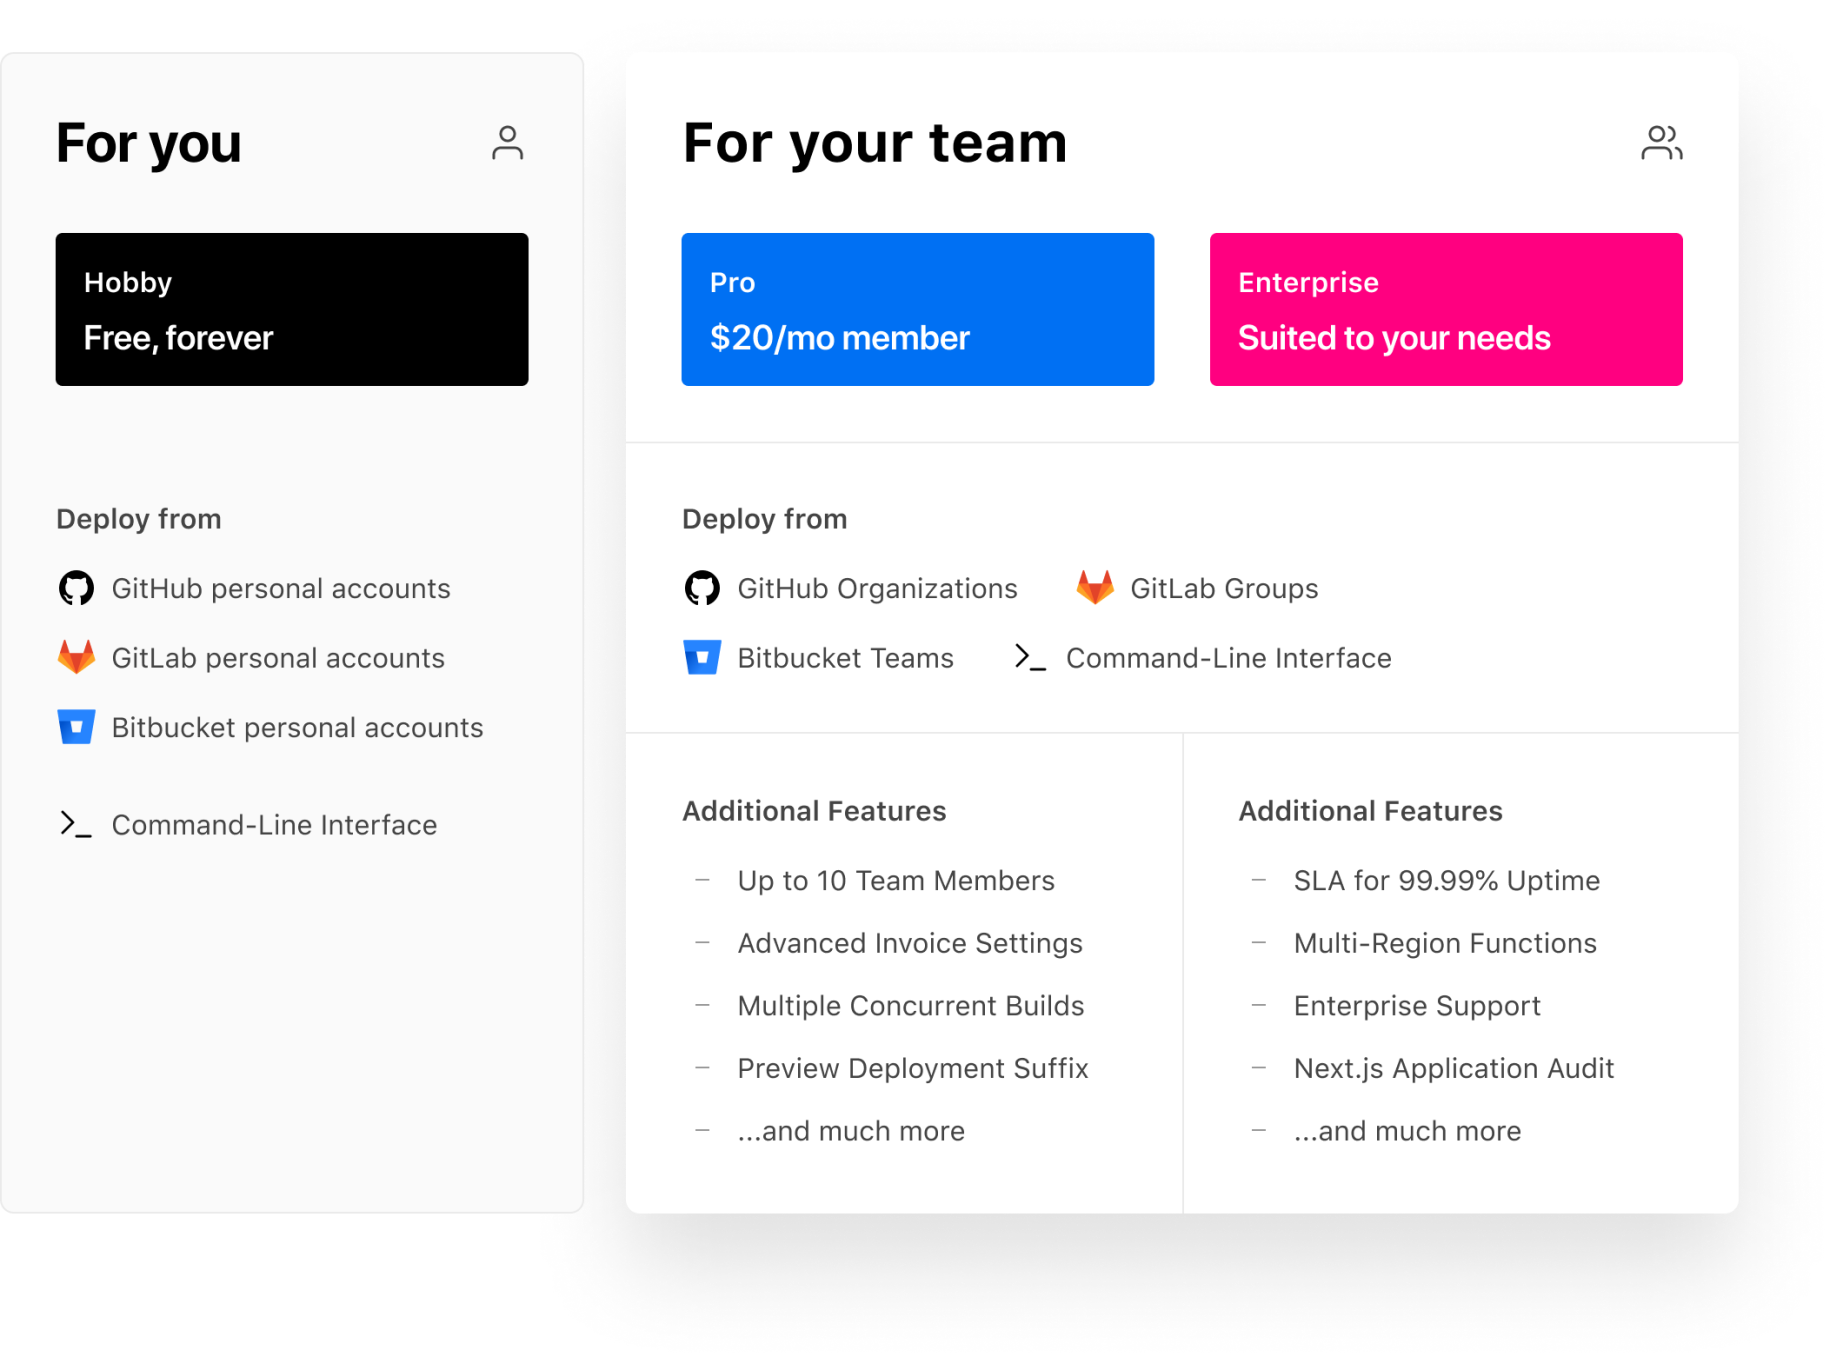 The new pricing plans for Personal Accounts and Teams.